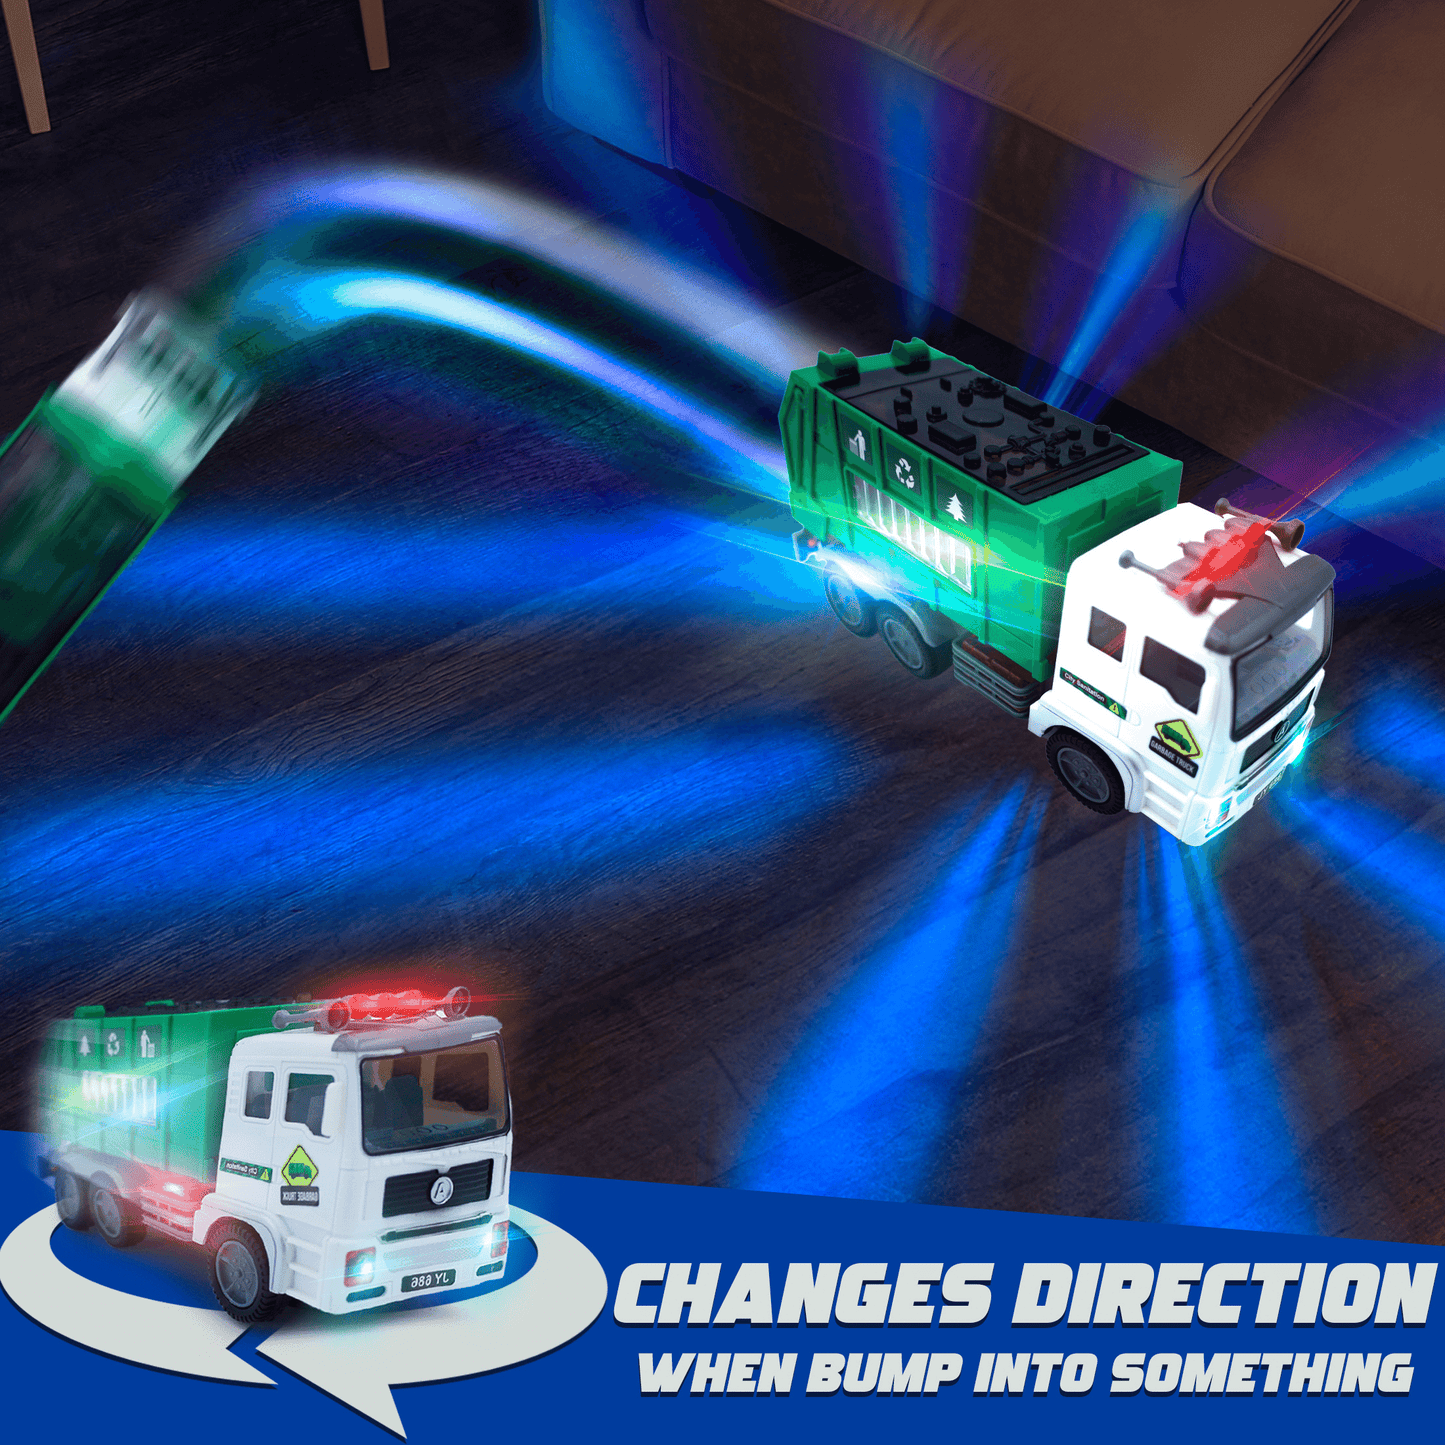 Garbage Truck Toy 4D Lights & Sounds - Battery-Powered Bump & Go Action, Kids Sanitation Vehicle with Realistic Stickers